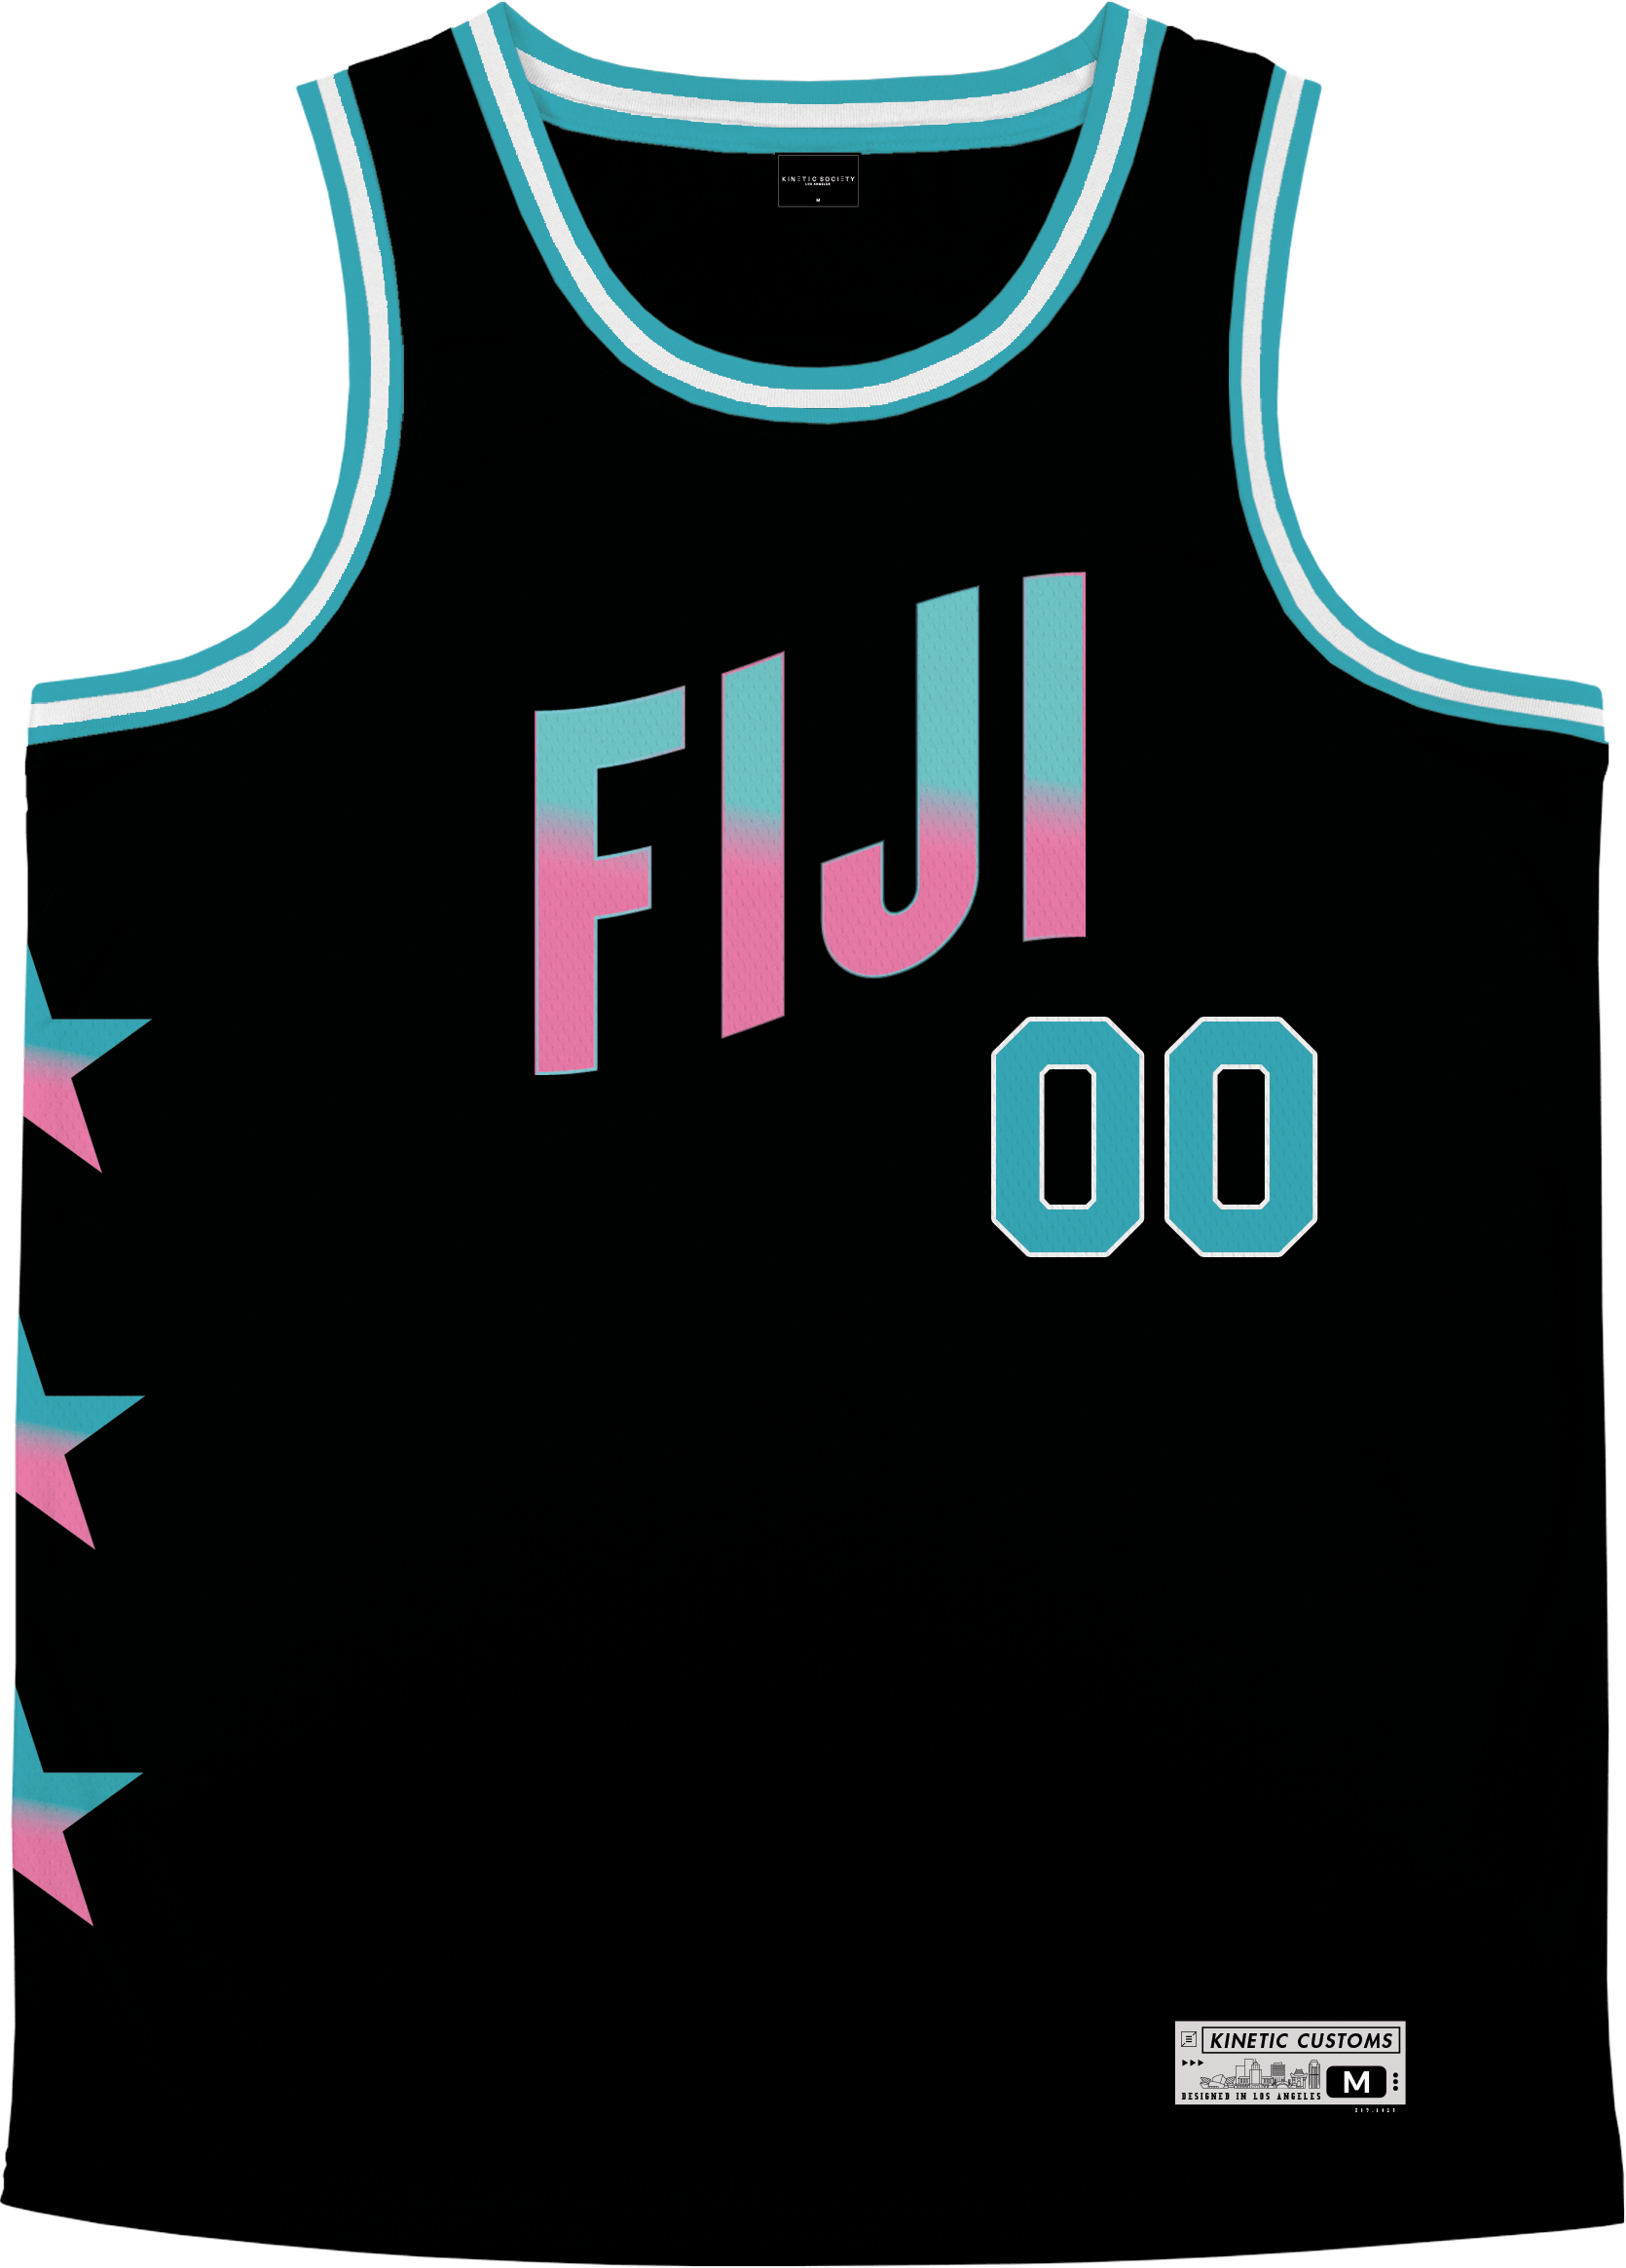 Phi Gamma Delta - Cotton Candy Basketball Jersey - Kinetic Society